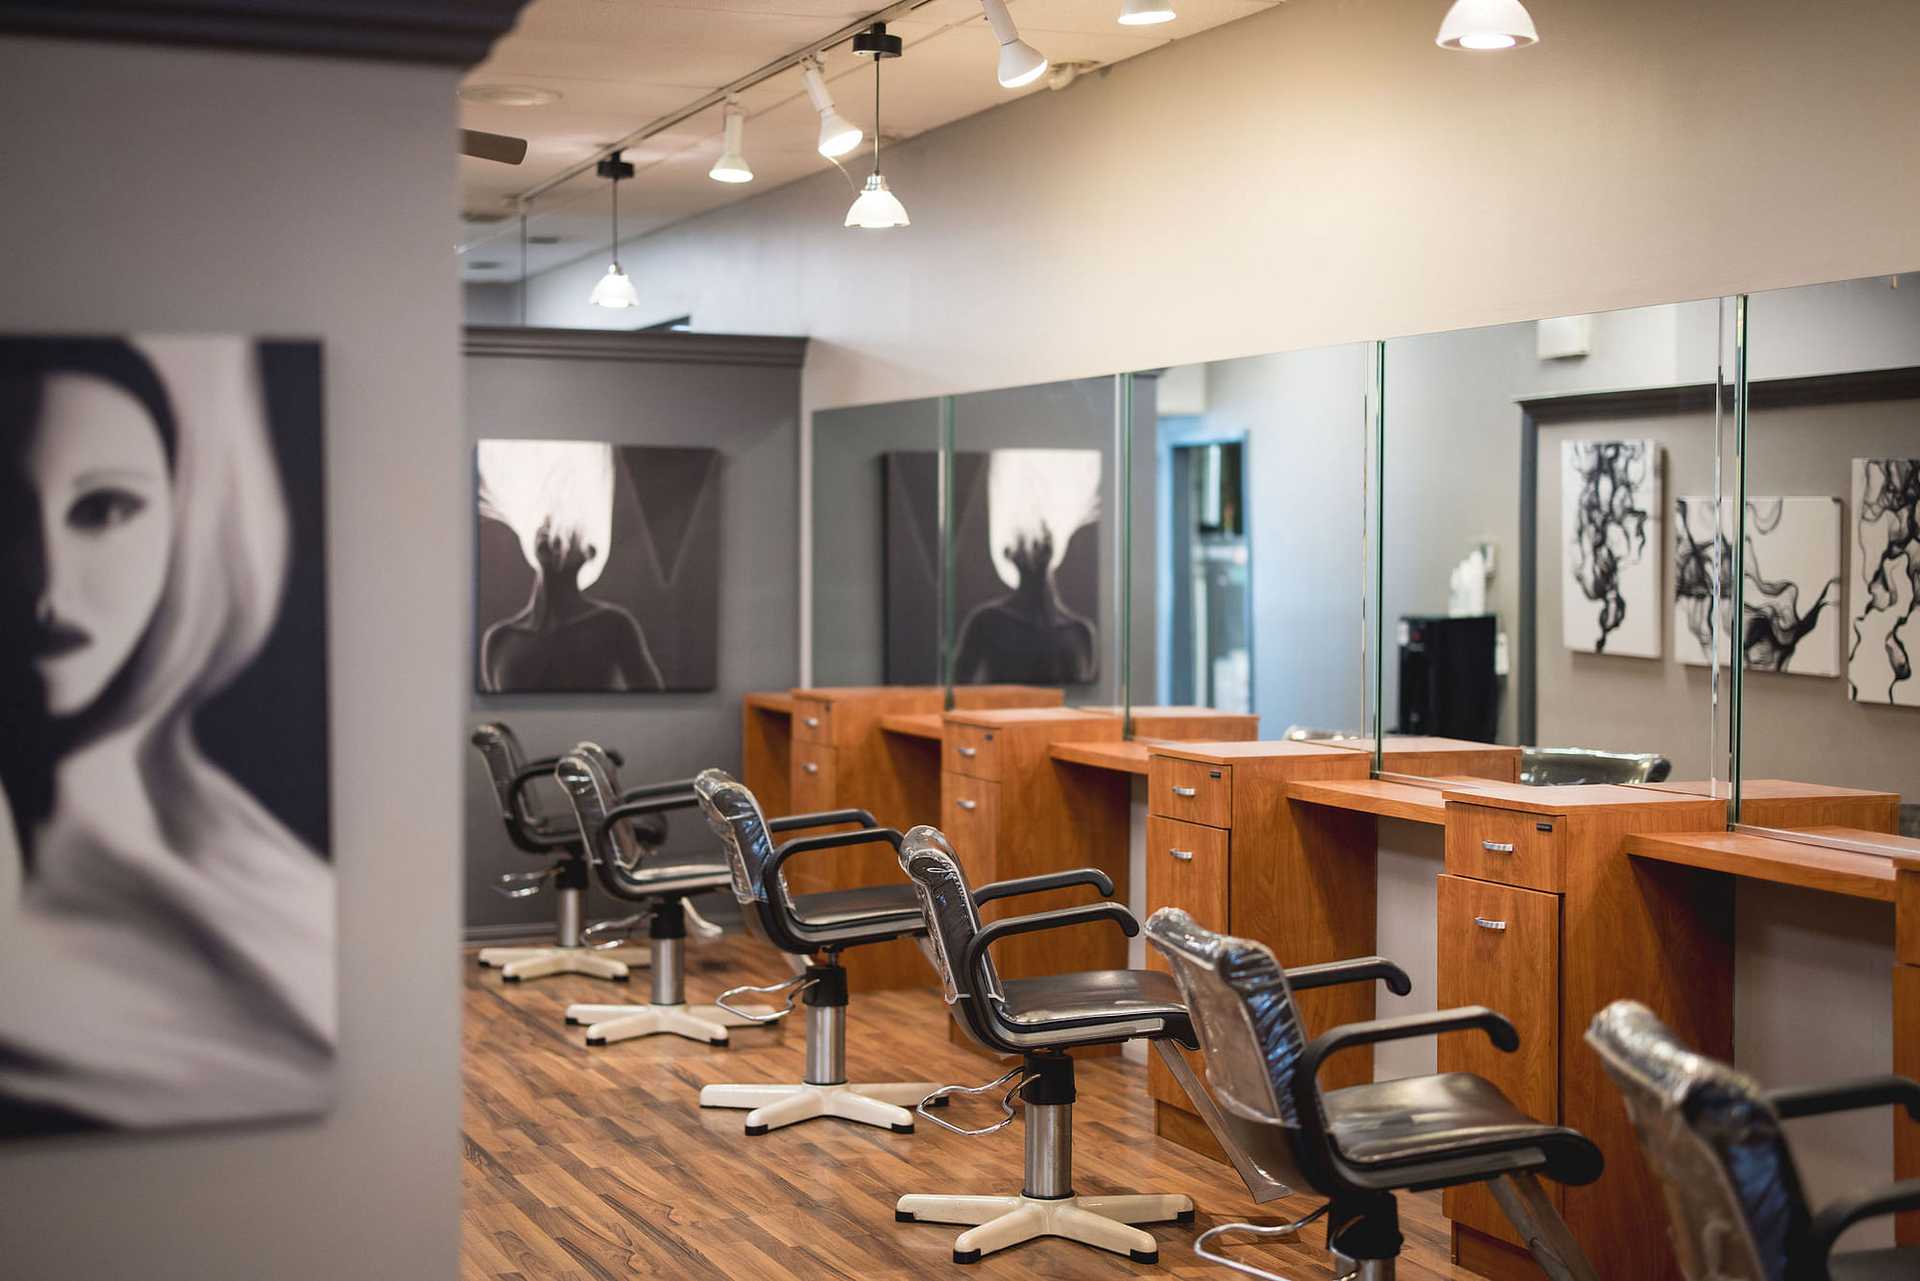 Modern hair salon with empty chairs, mirrors, and abstract black-and-white art on the walls.